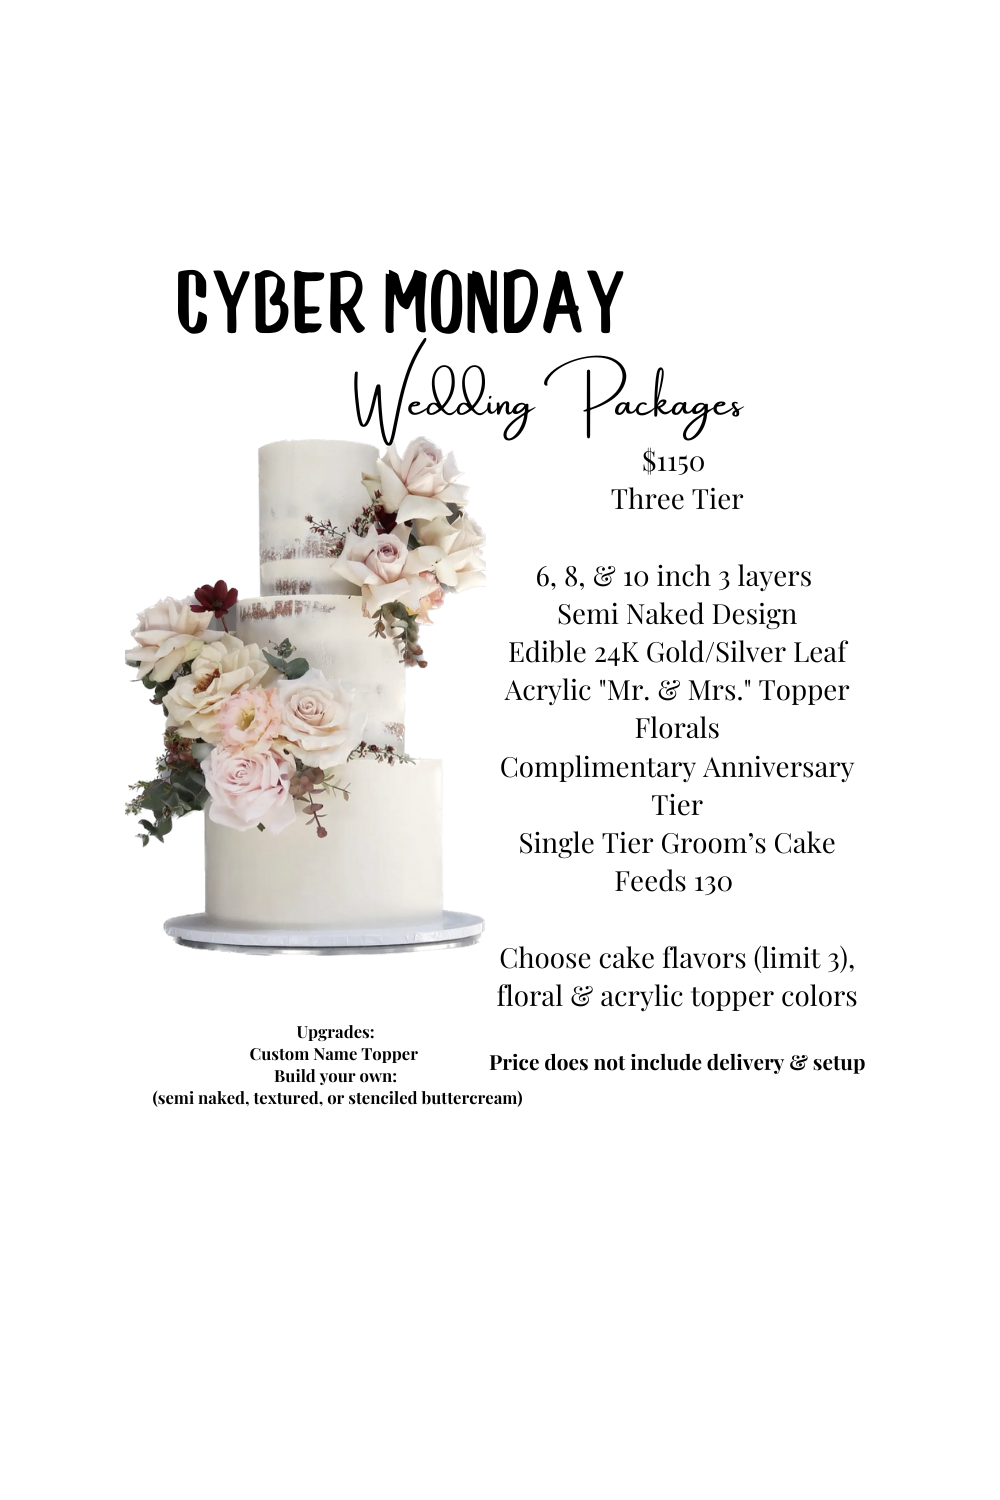 CYBER MONDAY Three Tier Wedding Package